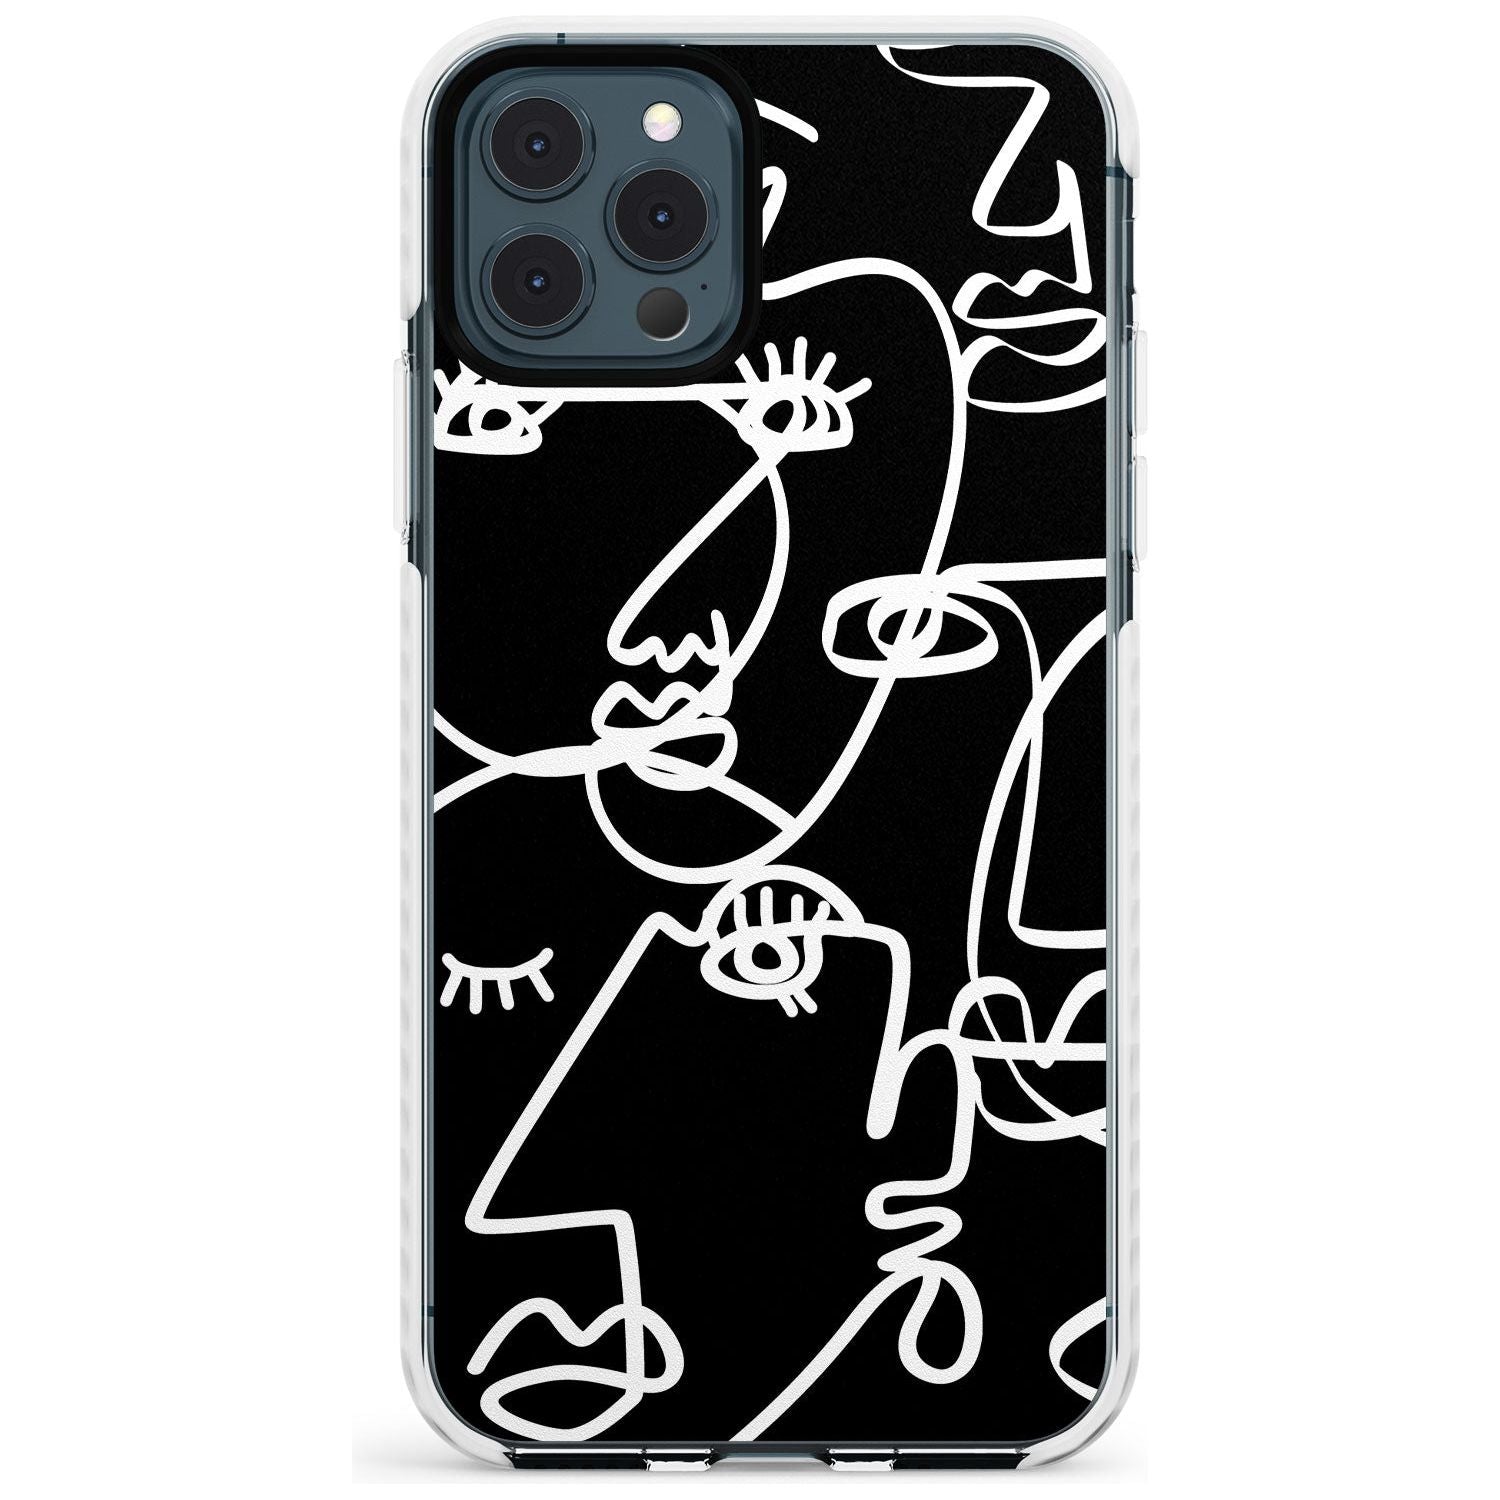 Continuous Line Faces: White on Black Slim TPU Phone Case for iPhone 11 Pro Max